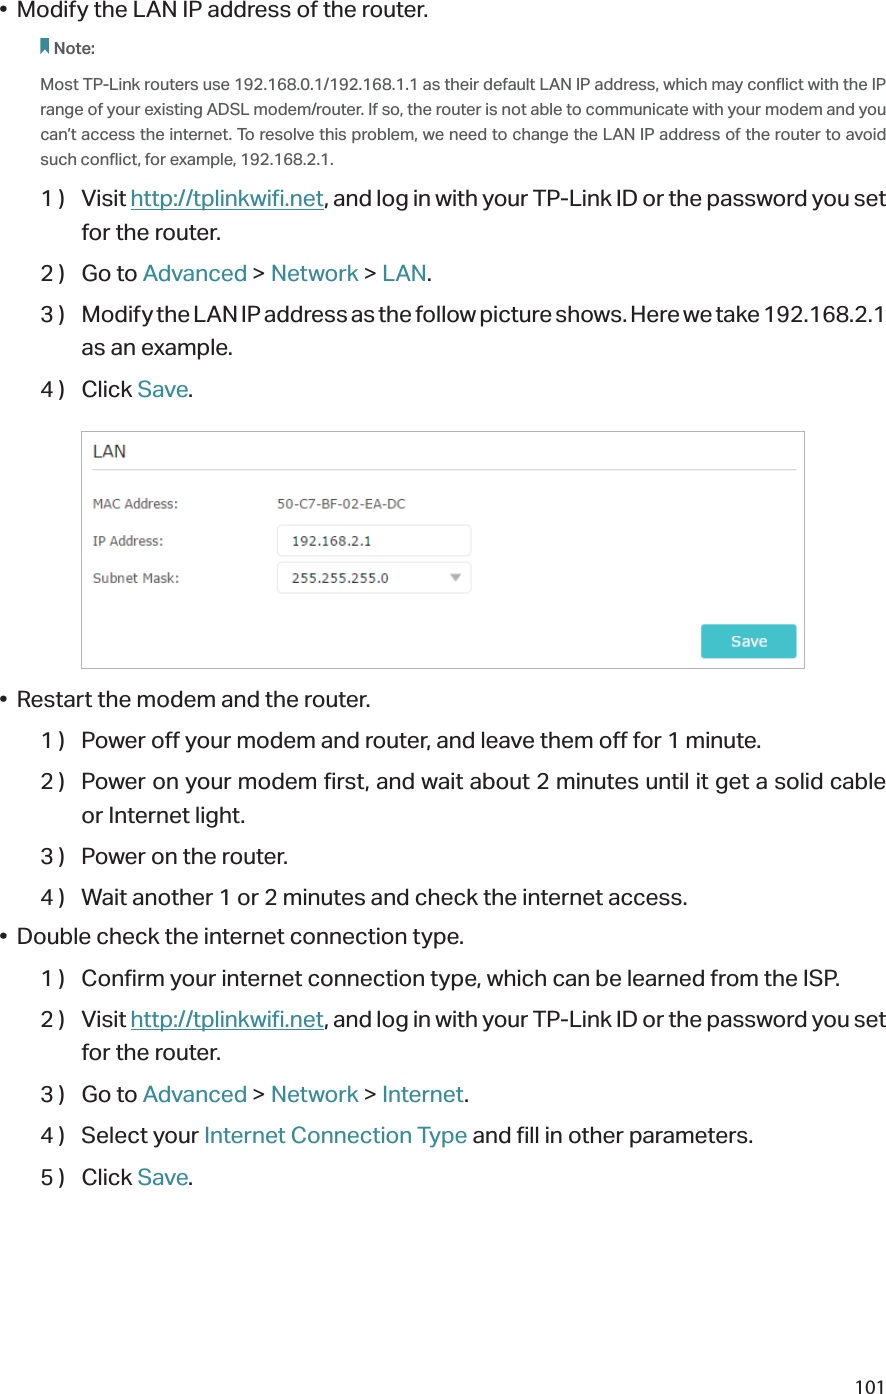 101•  Modify the LAN IP address of the router.Note: Most TP-Link routers use 192.168.0.1/192.168.1.1 as their default LAN IP address, which may conflict with the IP range of your existing ADSL modem/router. If so, the router is not able to communicate with your modem and you can’t access the internet. To resolve this problem, we need to change the LAN IP address of the router to avoid such conflict, for example, 192.168.2.1. 1 )  Visit http://tplinkwifi.net, and log in with your TP-Link ID or the password you set for the router.2 )  Go to Advanced &gt; Network &gt; LAN.3 )  Modify the LAN IP address as the follow picture shows. Here we take 192.168.2.1 as an example.4 )  Click Save.•  Restart the modem and the router.1 )  Power off your modem and router, and leave them off for 1 minute.2 )  Power on your modem first, and wait about 2 minutes until it get a solid cable or Internet light.3 )  Power on the router.4 )  Wait another 1 or 2 minutes and check the internet access.•  Double check the internet connection type.1 )  Confirm your internet connection type, which can be learned from the ISP.2 )  Visit http://tplinkwifi.net, and log in with your TP-Link ID or the password you set for the router.3 )  Go to Advanced &gt; Network &gt; Internet.4 )  Select your Internet Connection Type and fill in other parameters.5 )  Click Save.